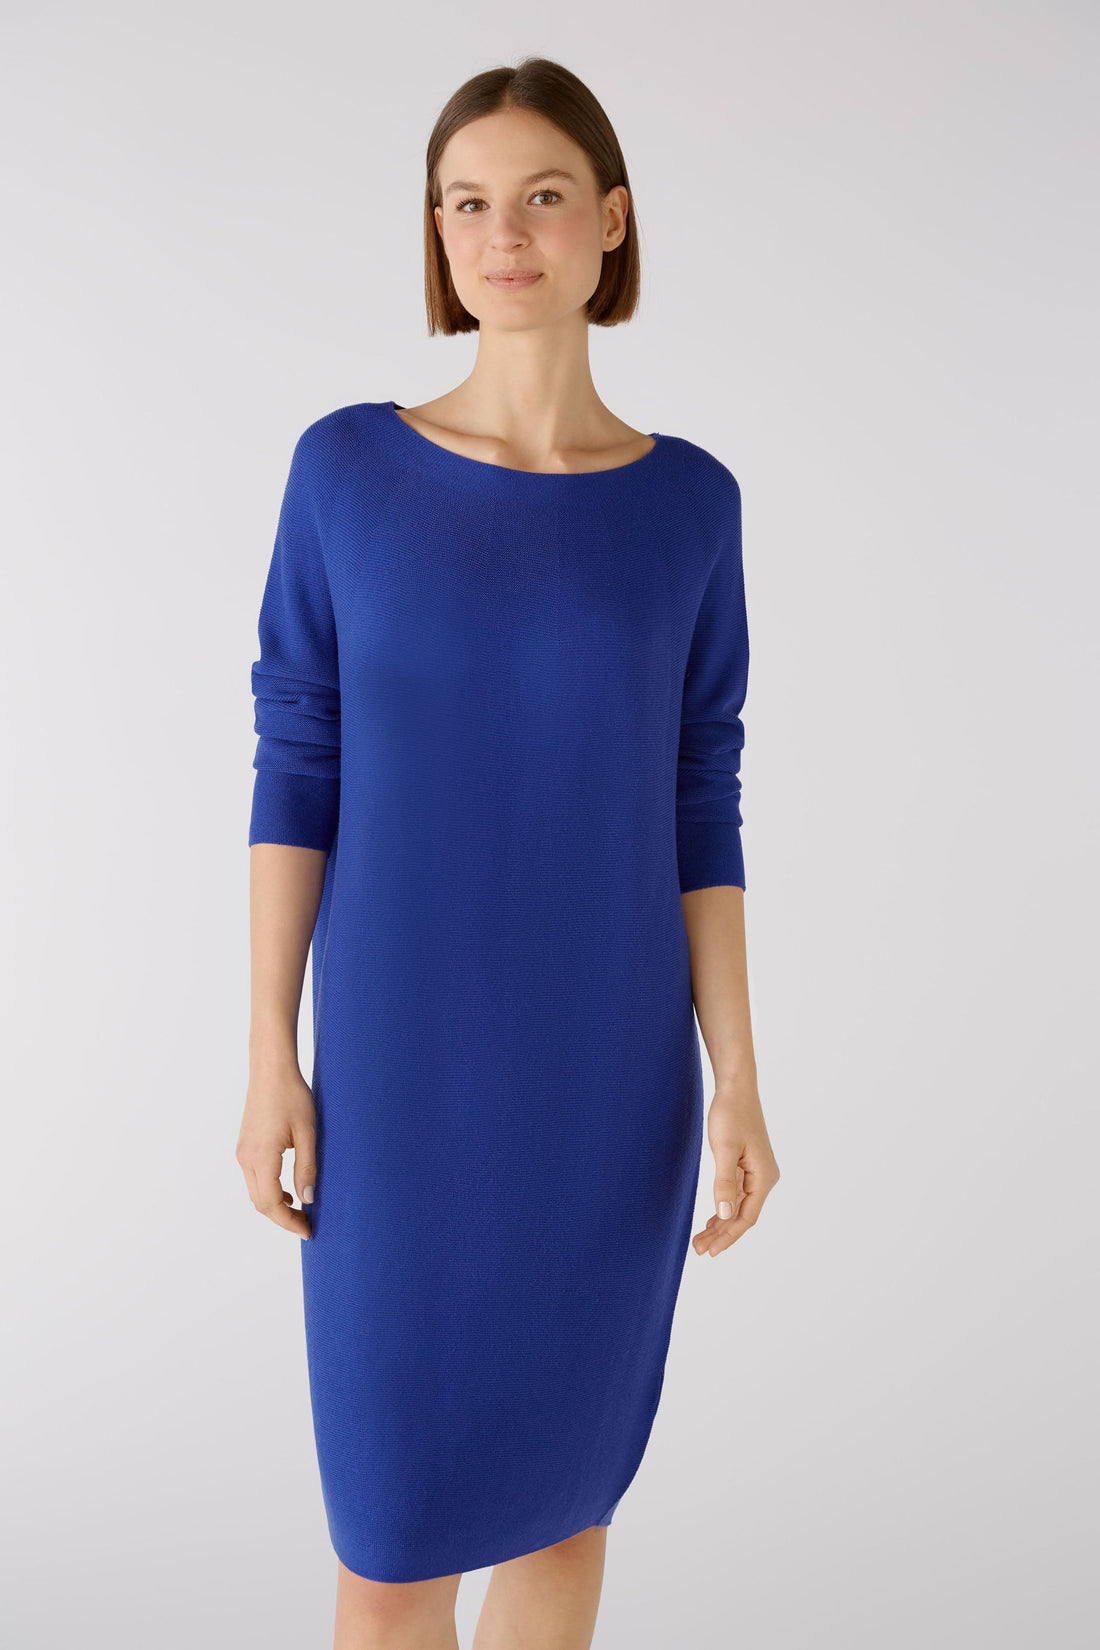 Knitted Dress In A Fine Viscose Blend With Silk_79013_5410_02